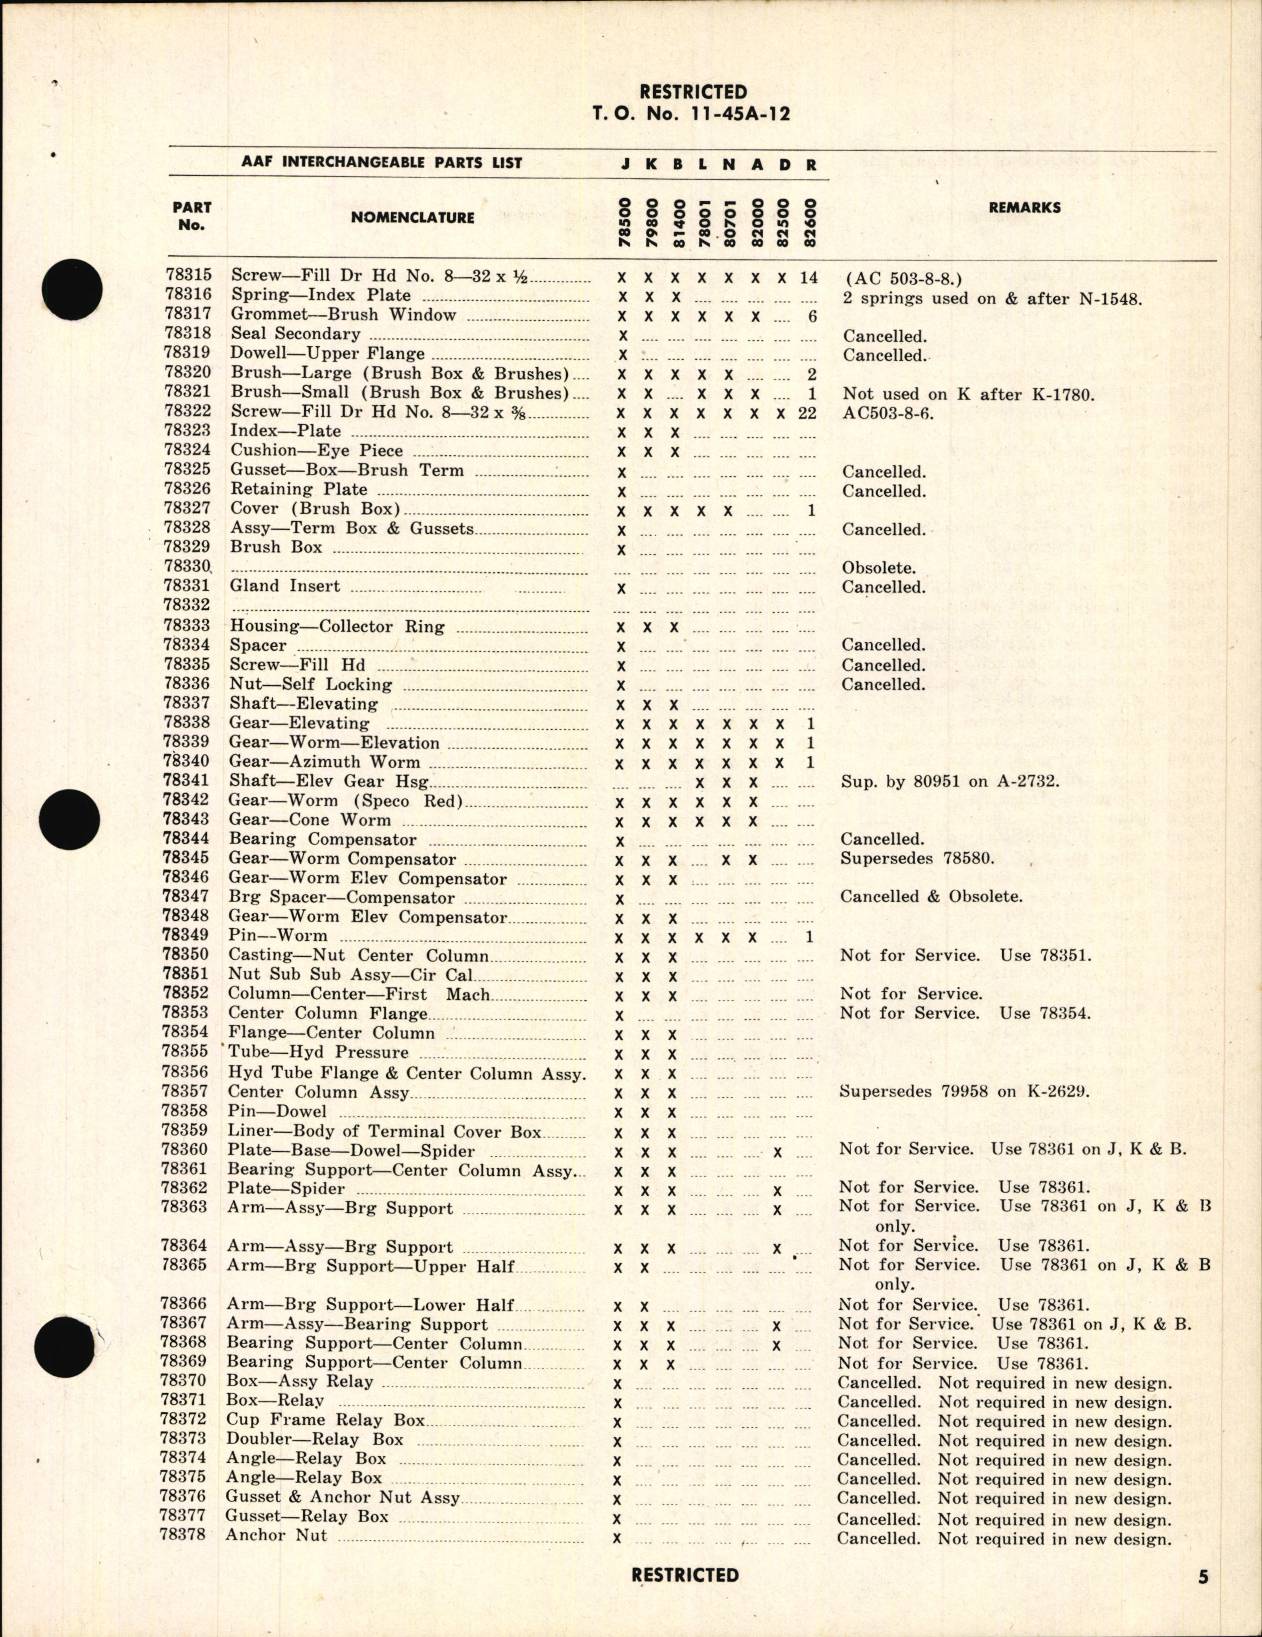 Sample page 7 from AirCorps Library document: Interchangeable Parts List for Bendix Power Operated Turrets